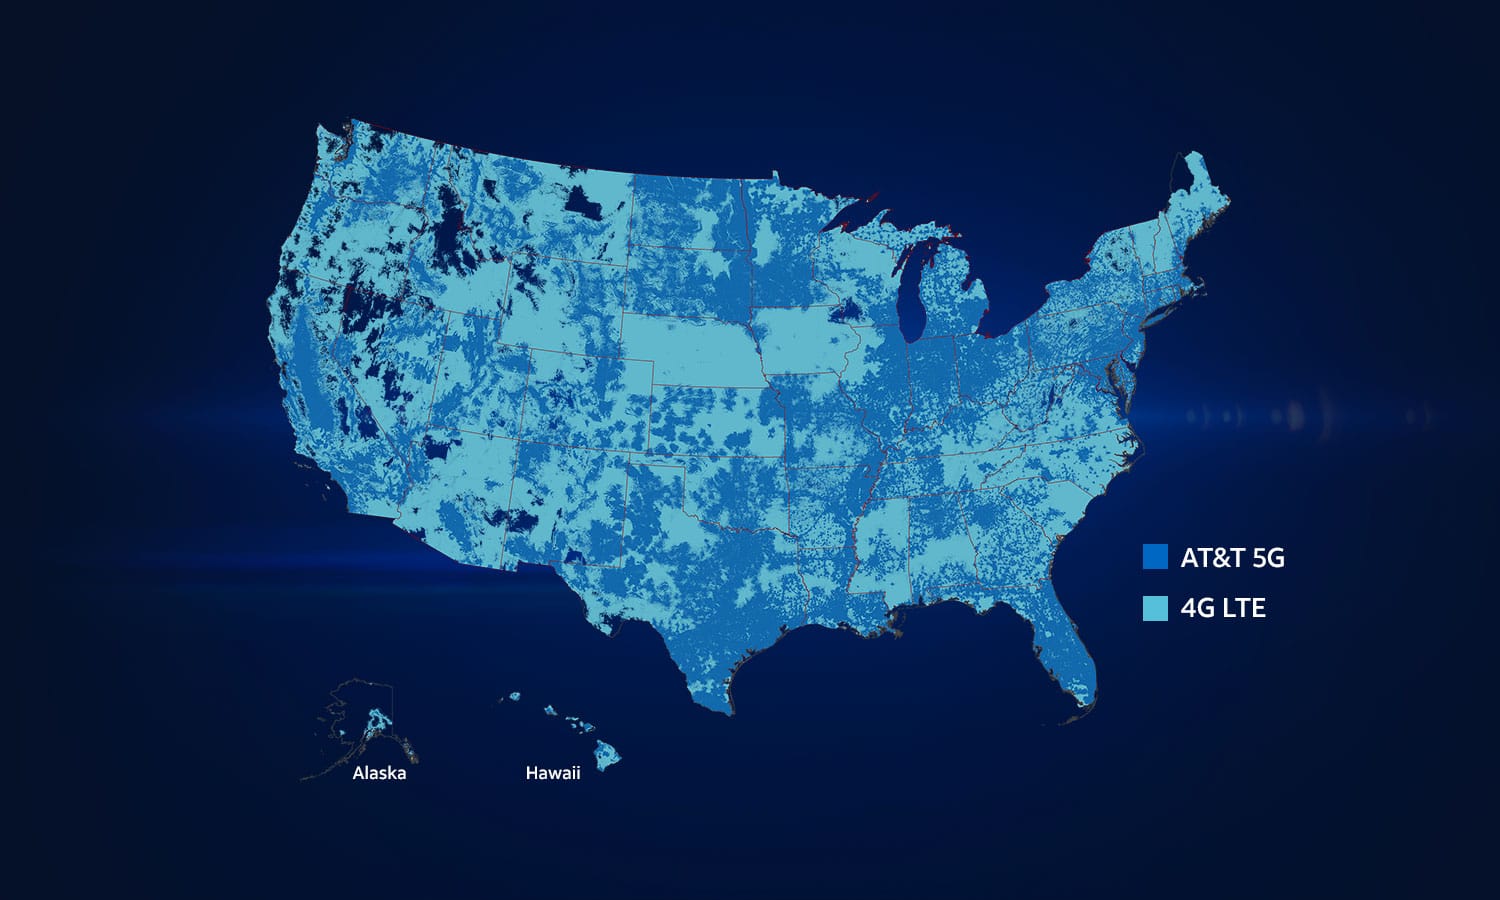 AT&T 5G and 4G Coverage Map